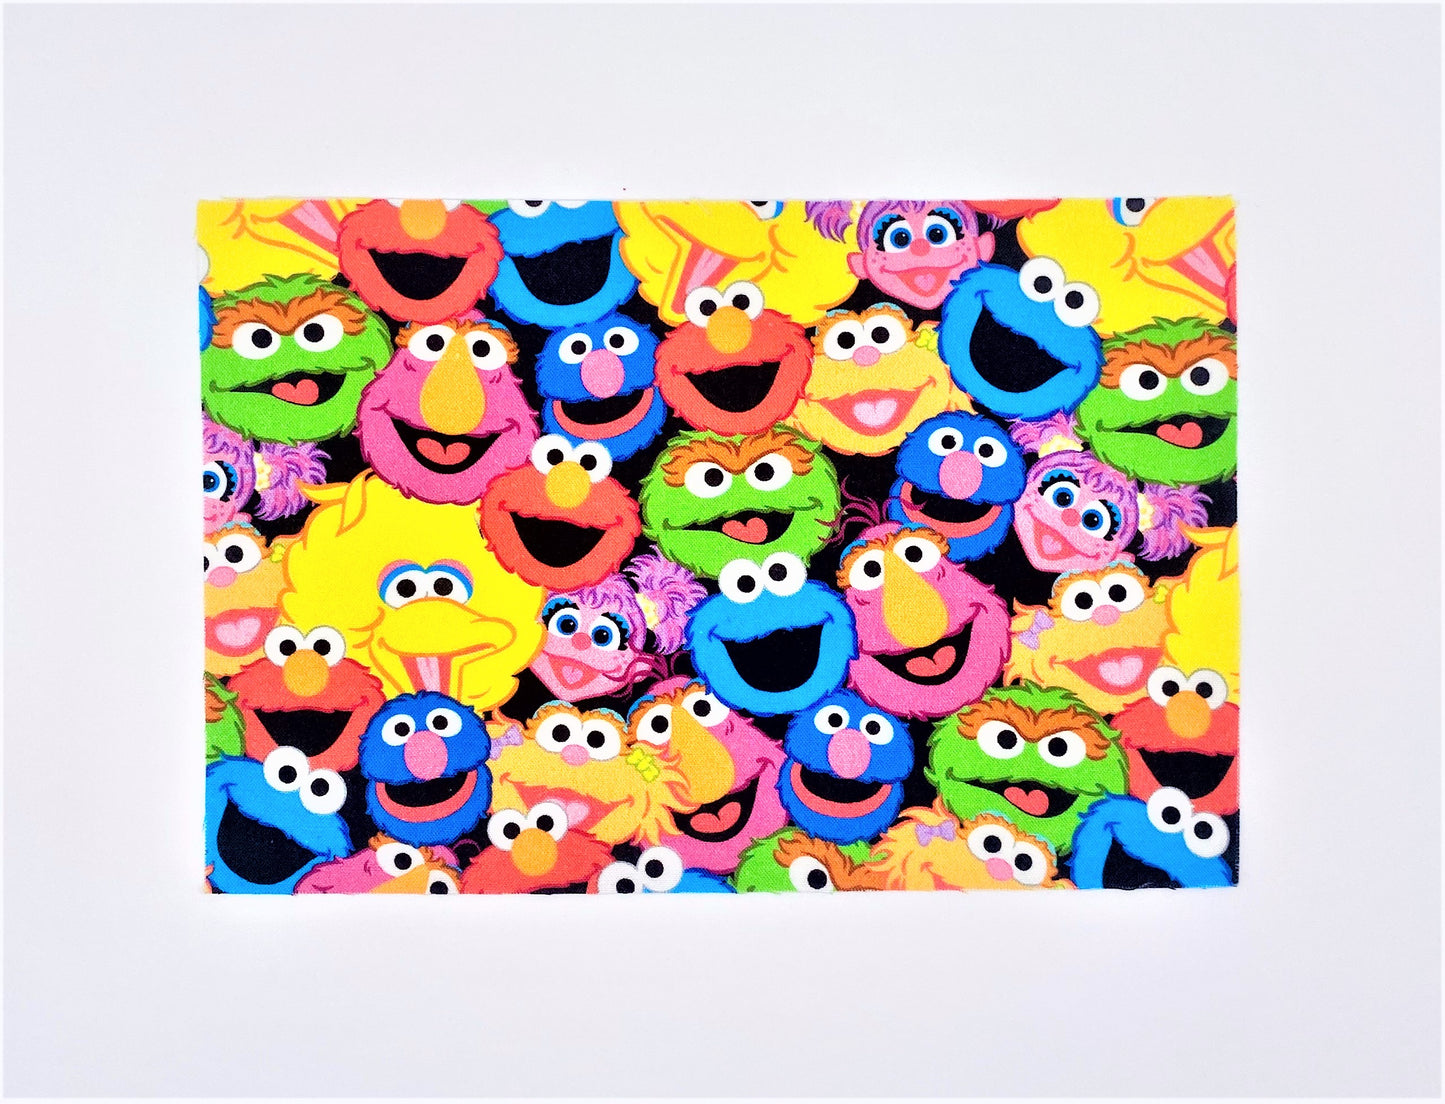 Licensed Print - Puppet Street: Rectangle Kids Face Masks (One Size Fits Most; Ages 10 and under)